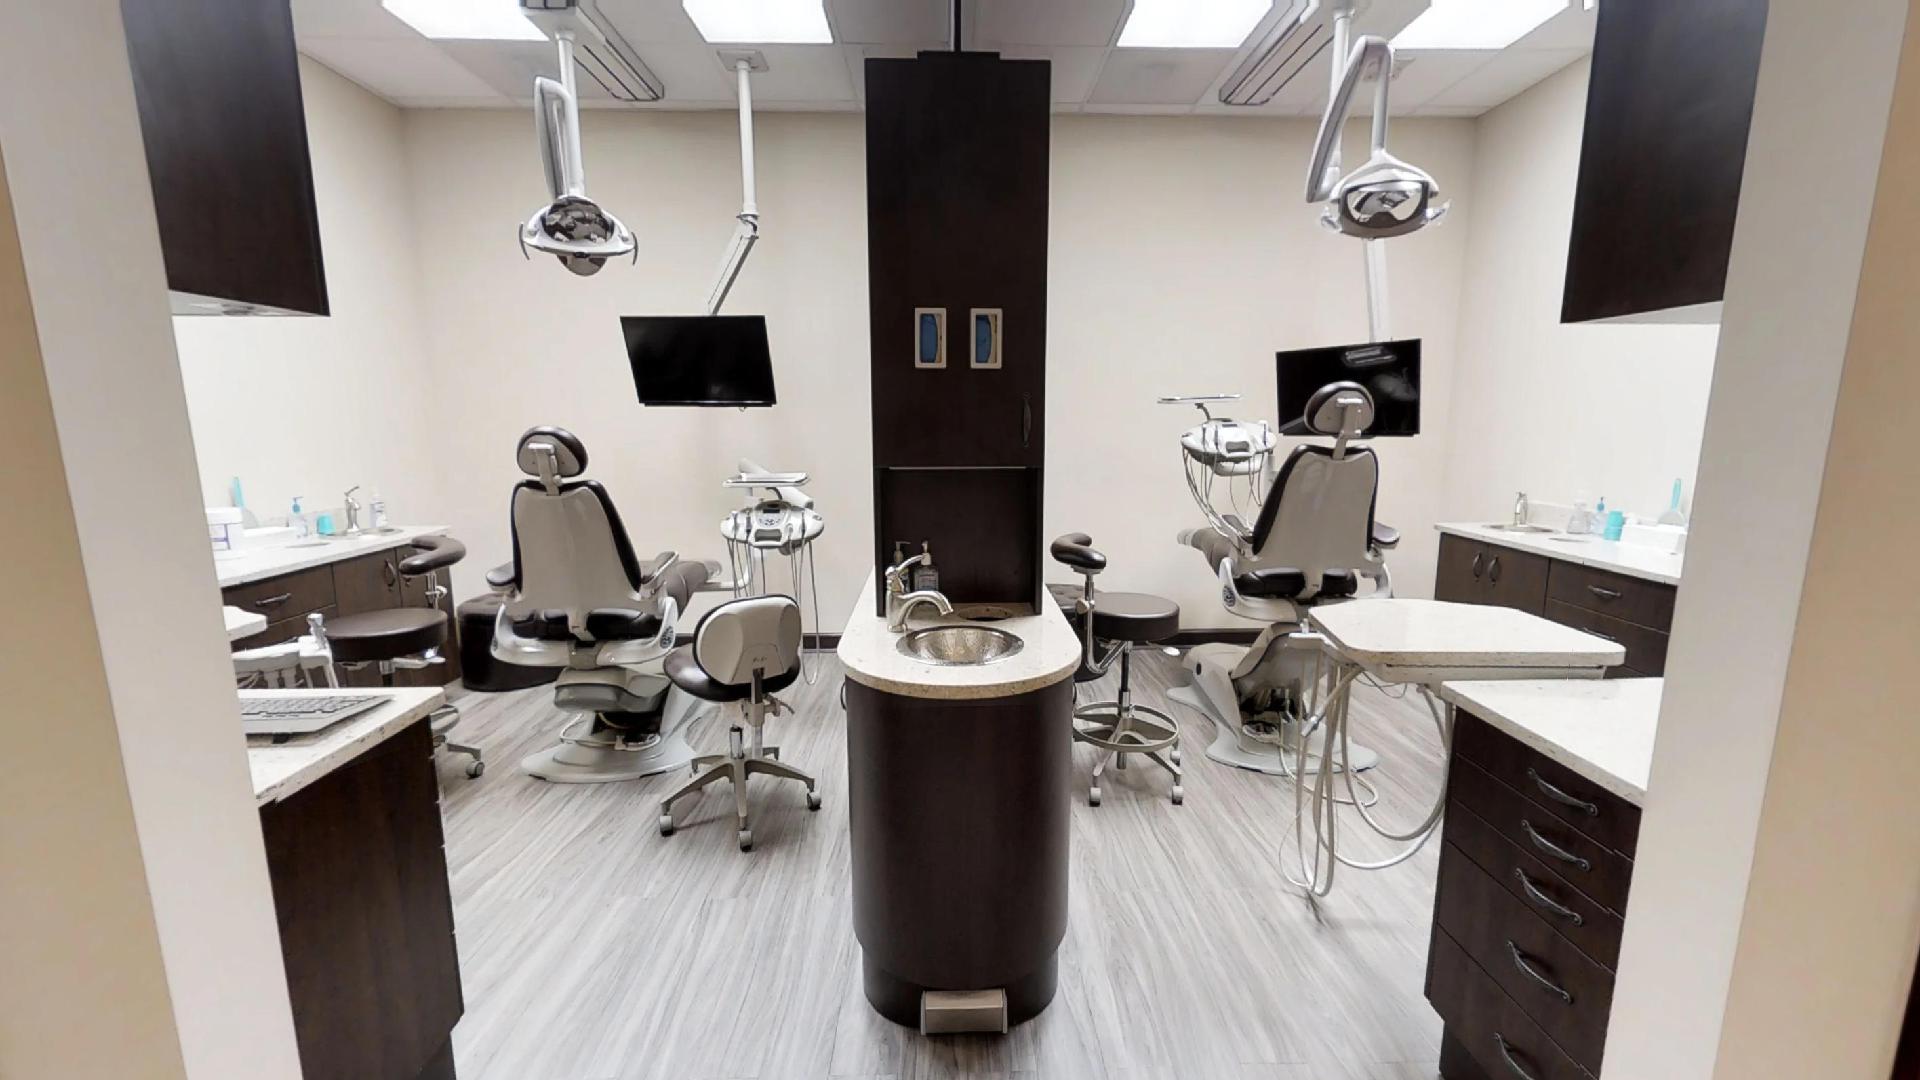 Watch this practice being built – LIVE dental office construction!